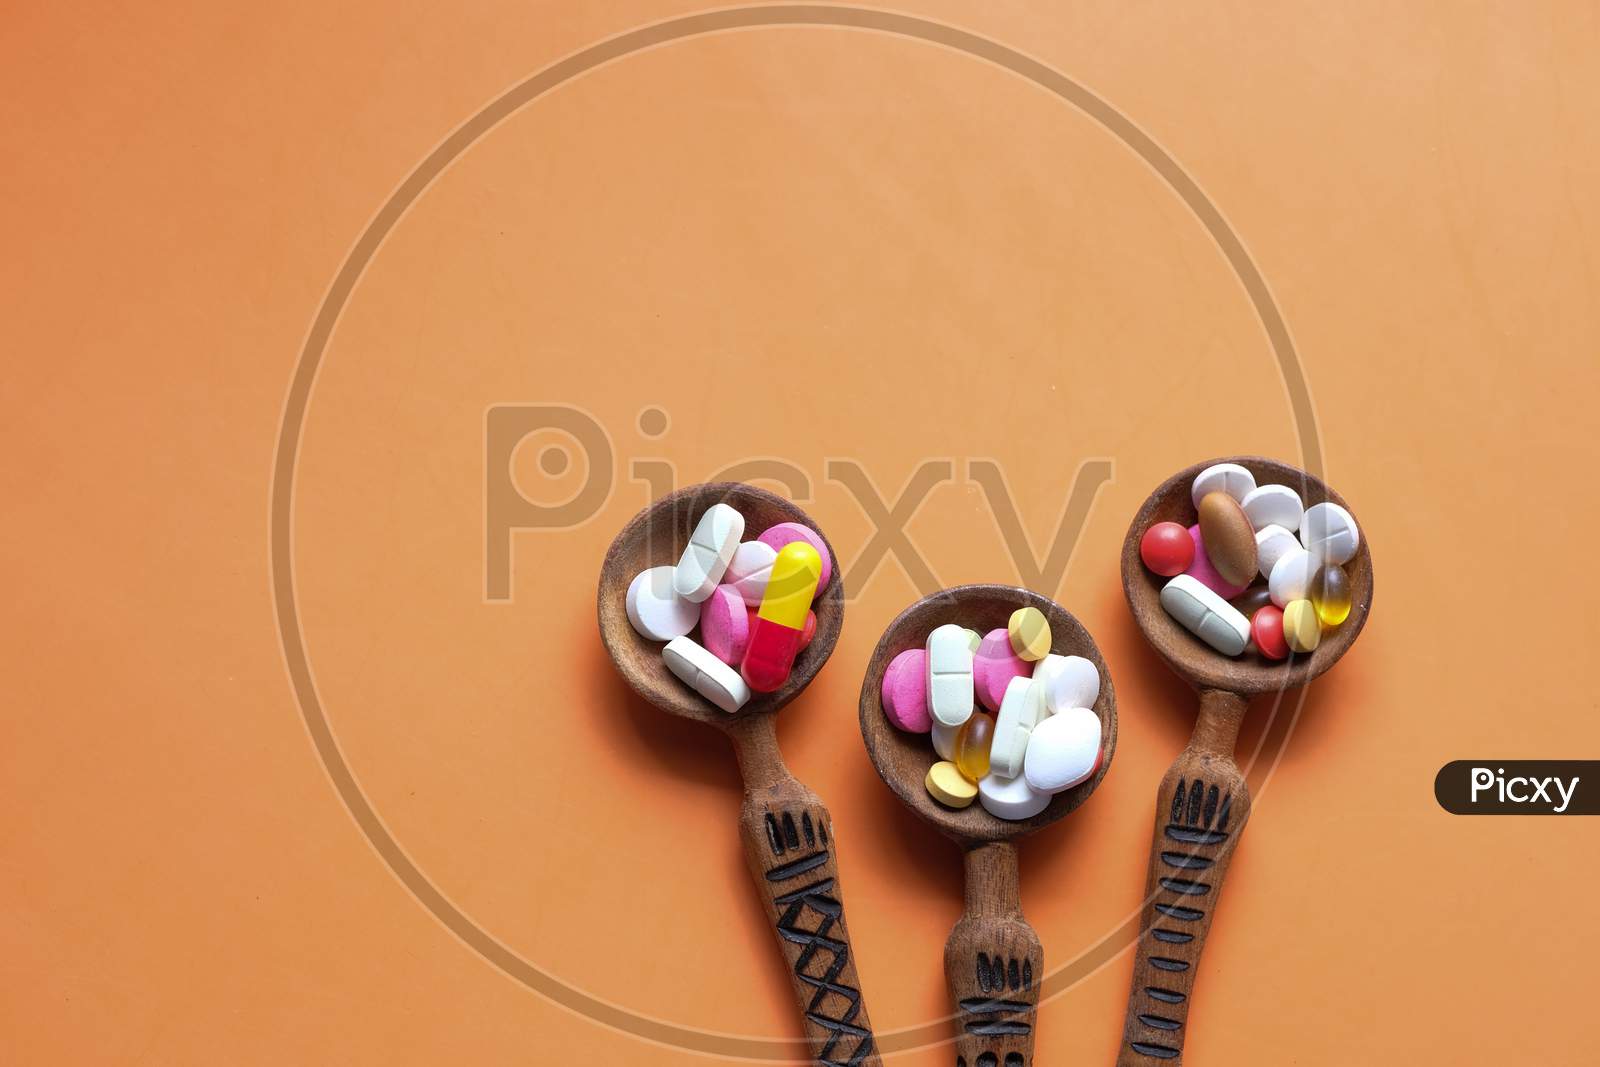 High Angle View Of Pills On Spoon On Orange Desk